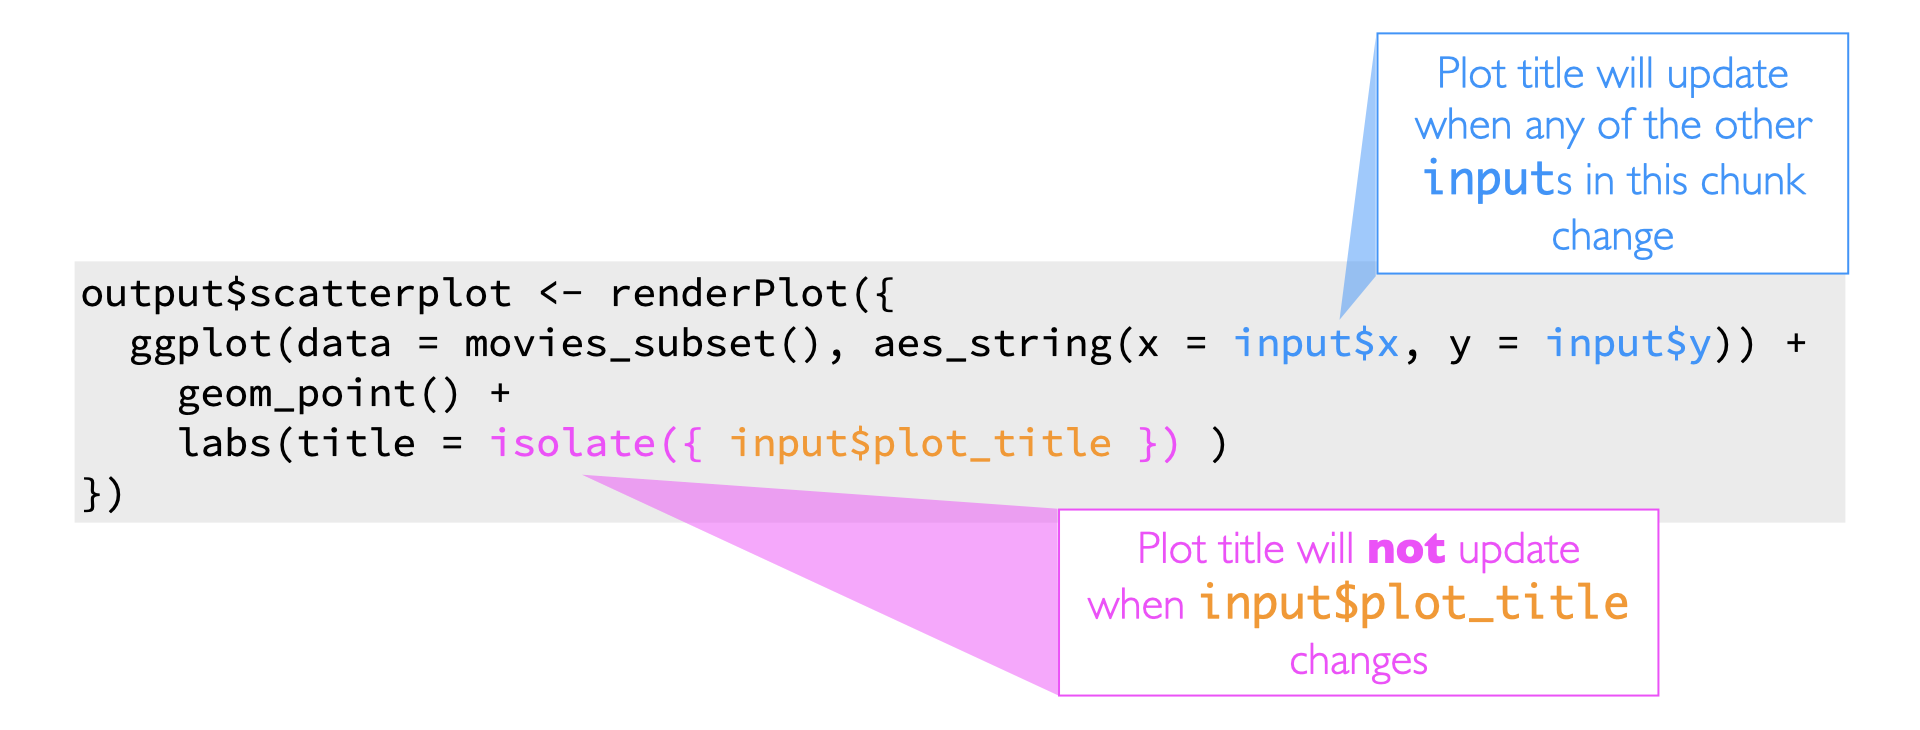 Section of the code with 'output$scatterplot <- renderPlot'. 'input$x' is highlighted with a description of Plot title will update when any of the other inputs in this chunk change. 'isolate({input$plot_title})' is highlighed with the description Plot title will not update when input$plot_title changes.